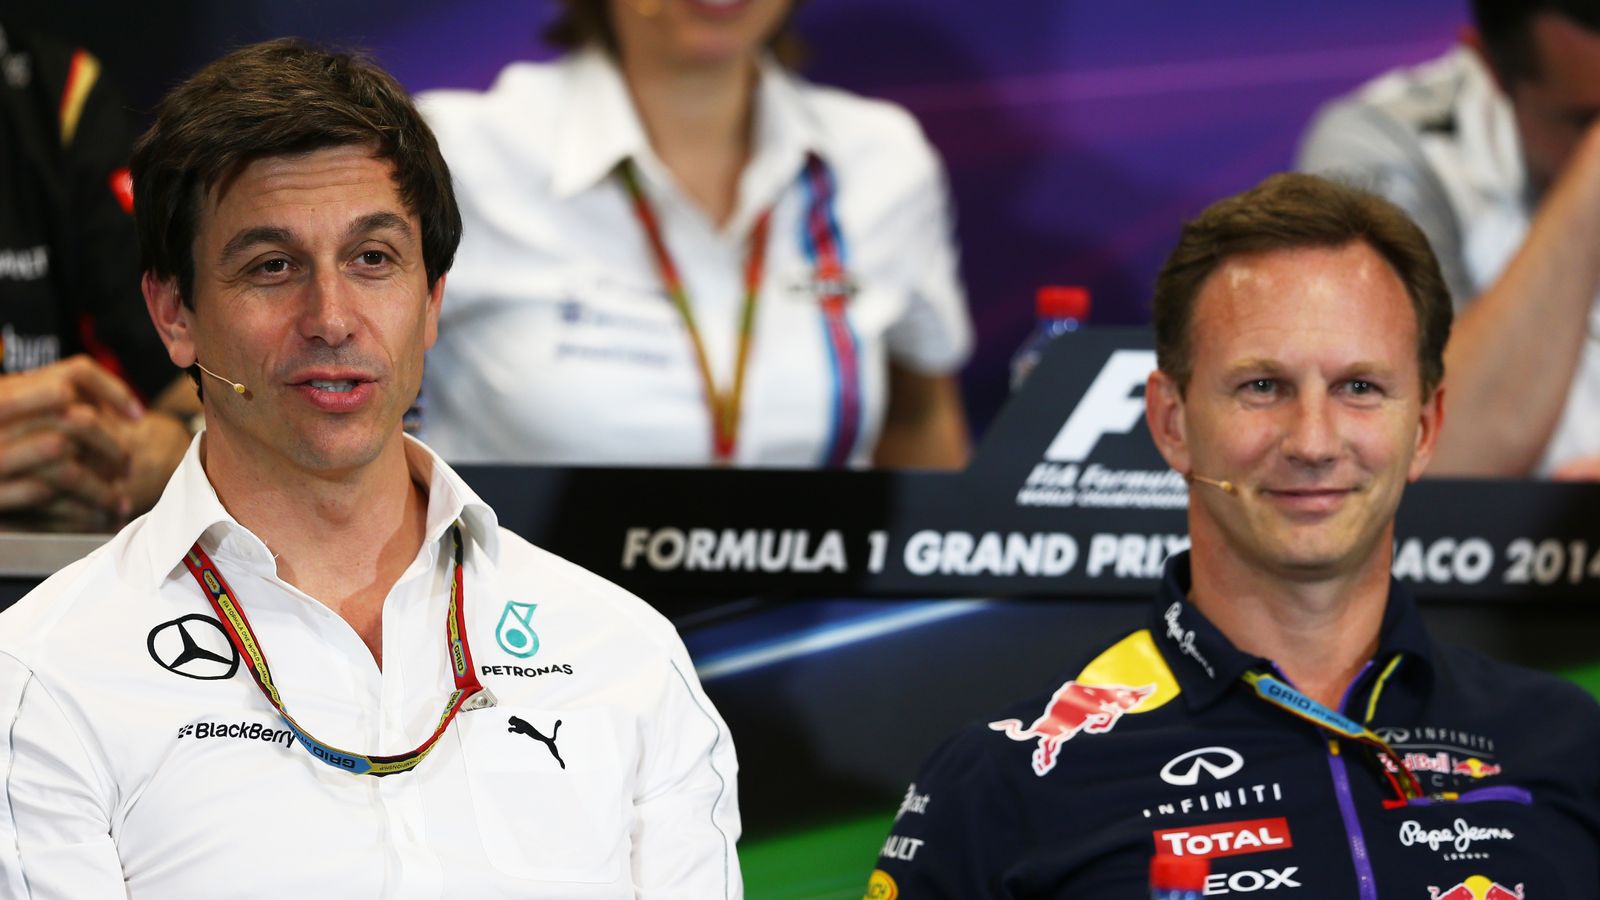 Mercedes boss Toto Wolff opens up on Red Bull engine refusal | F1 News